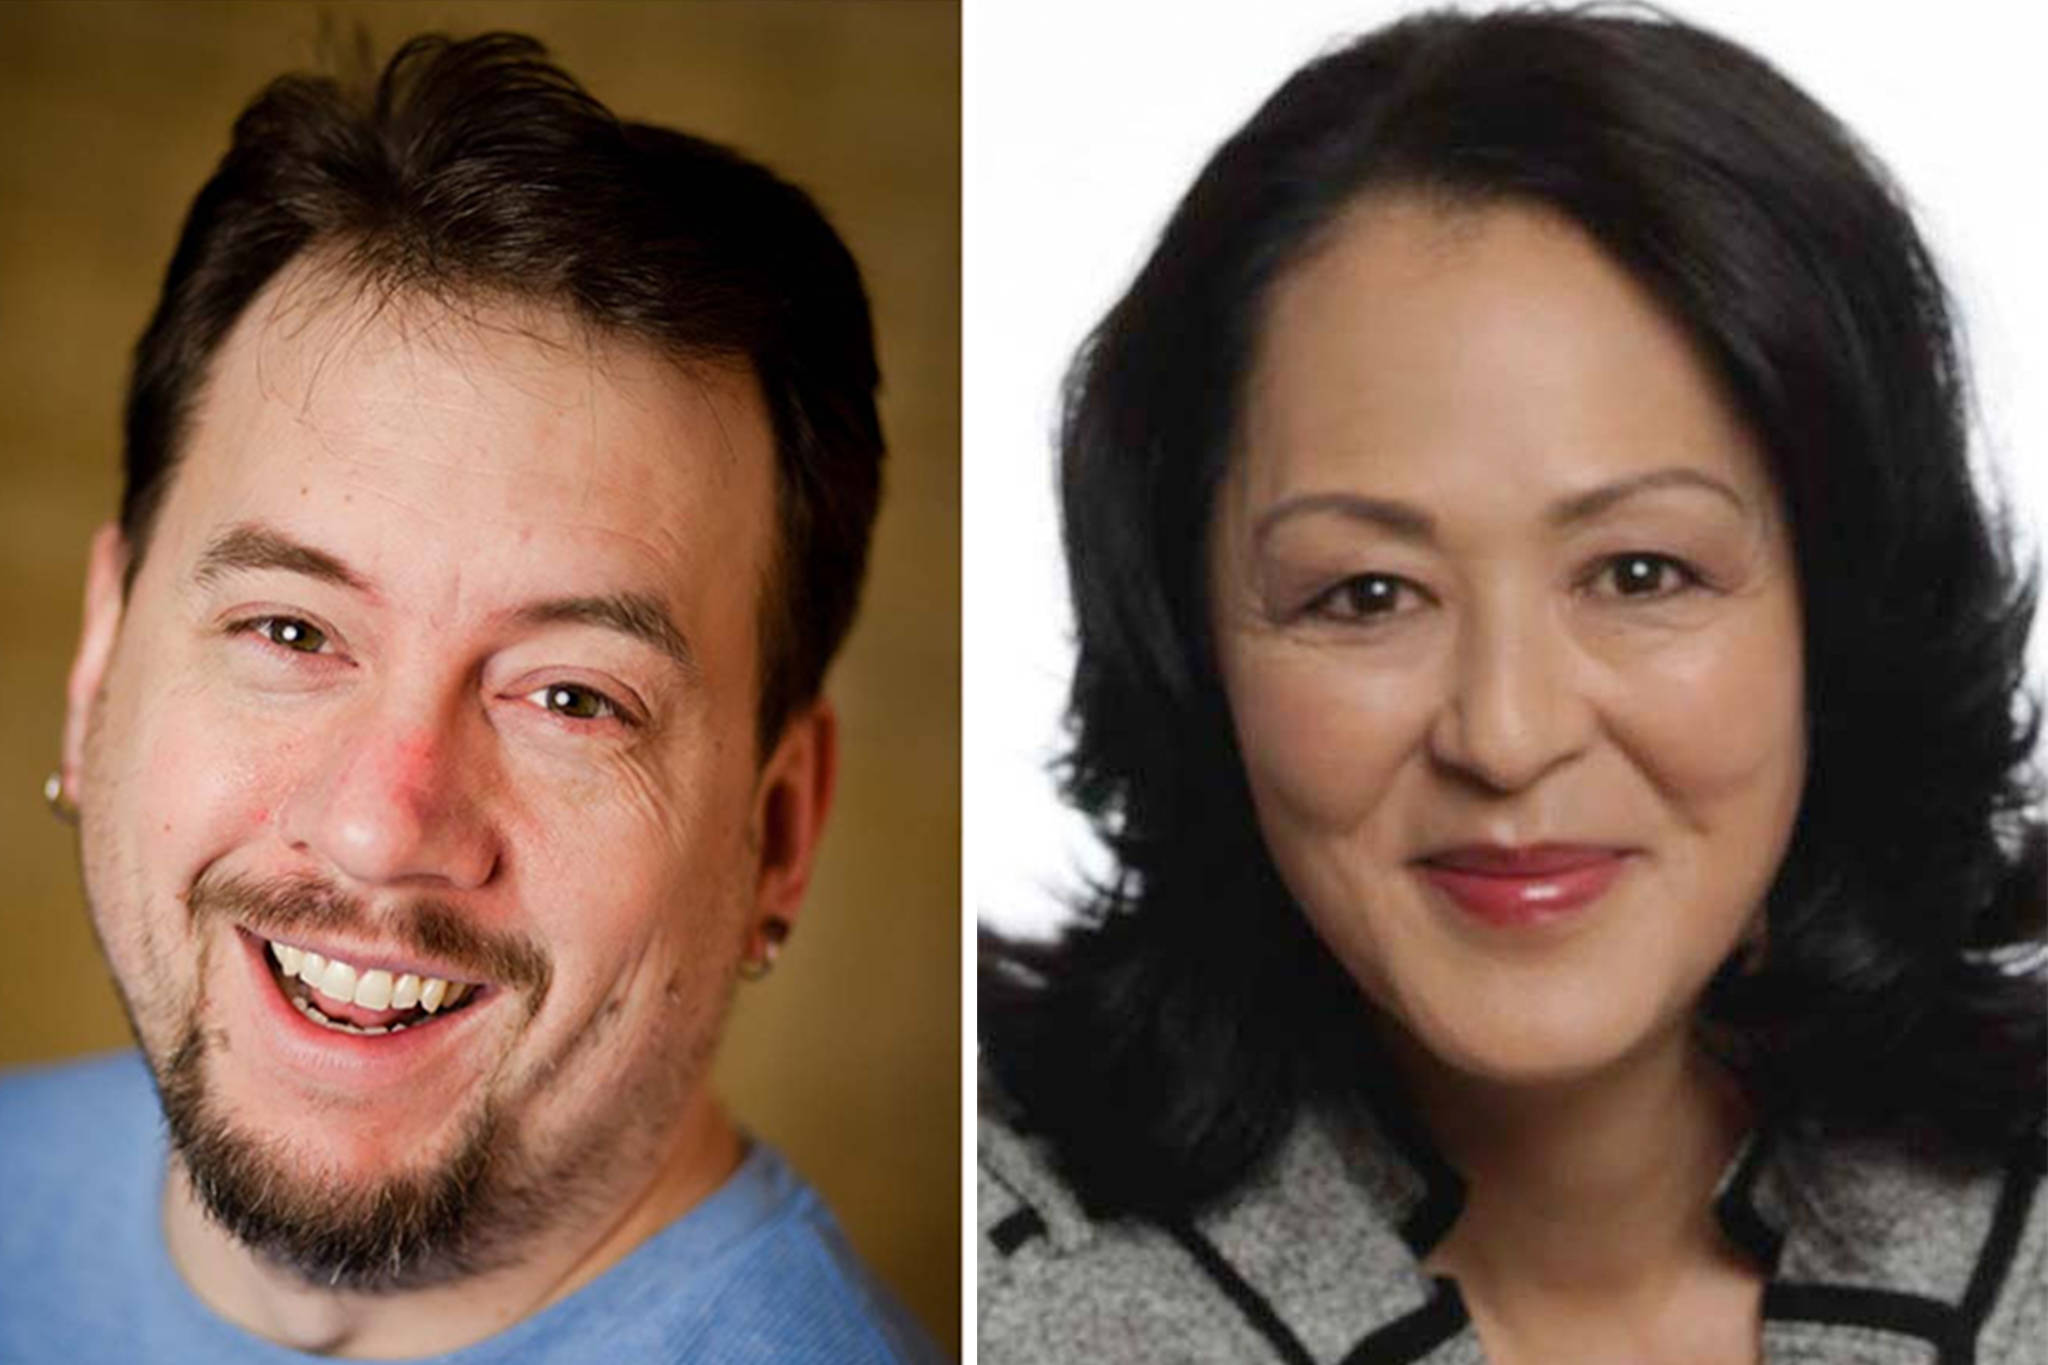 Perseverance Theatre managing director Frank Delaney and artistic director Leslie Ishii will be among the speakers at today’s Greater Juneau Chamber of Commerce Luncheon. (Courtesy Photo | Perseverance Theatre)